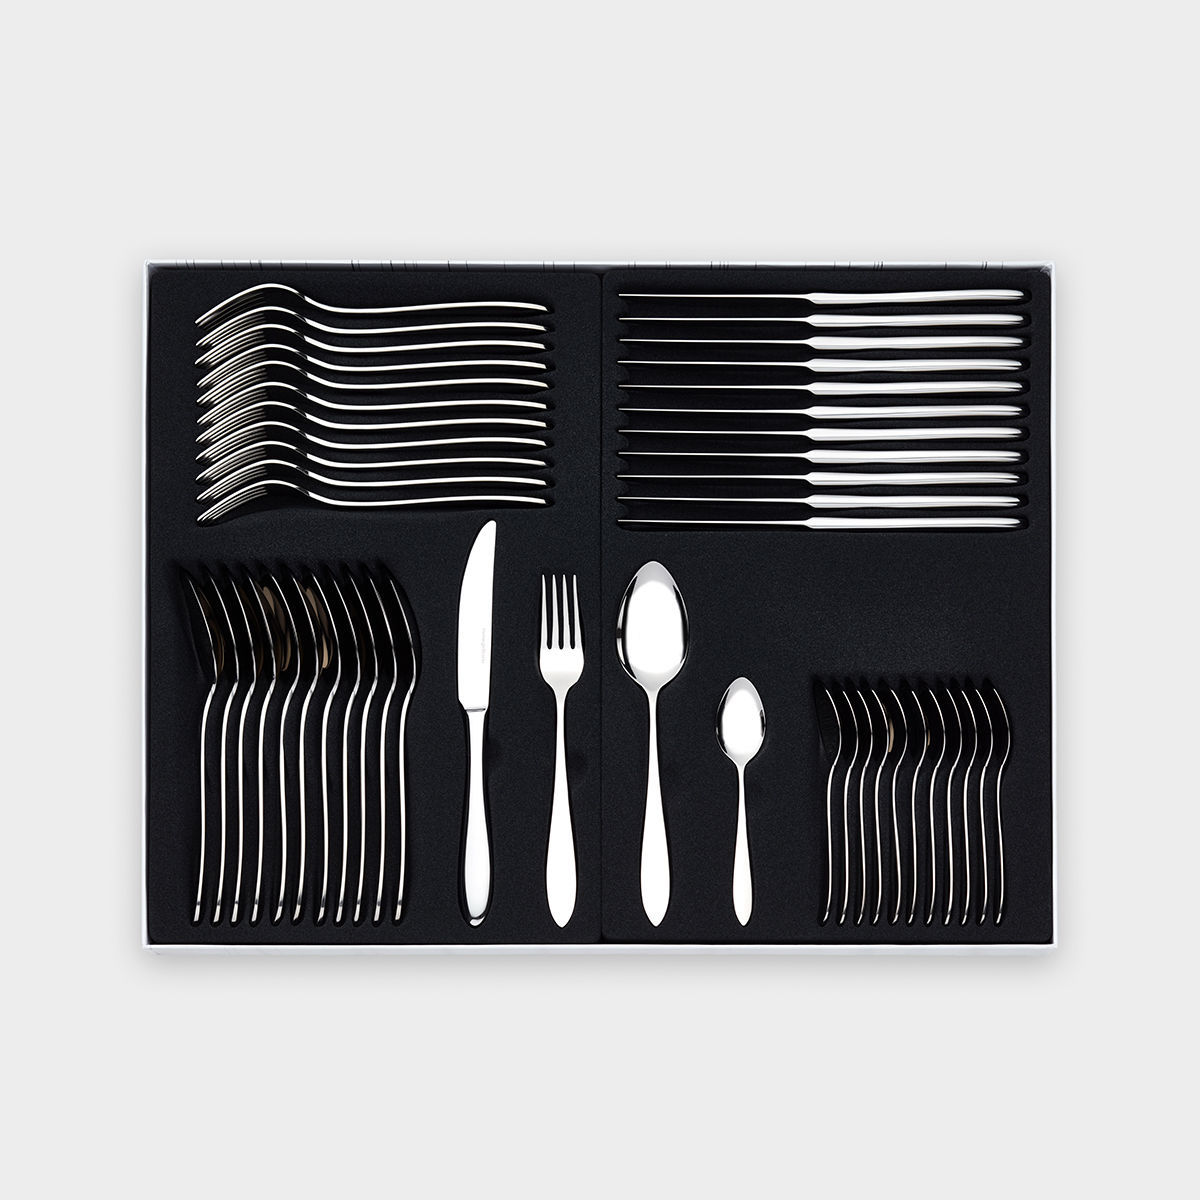 Fjord cutlery set 48 pieces product image